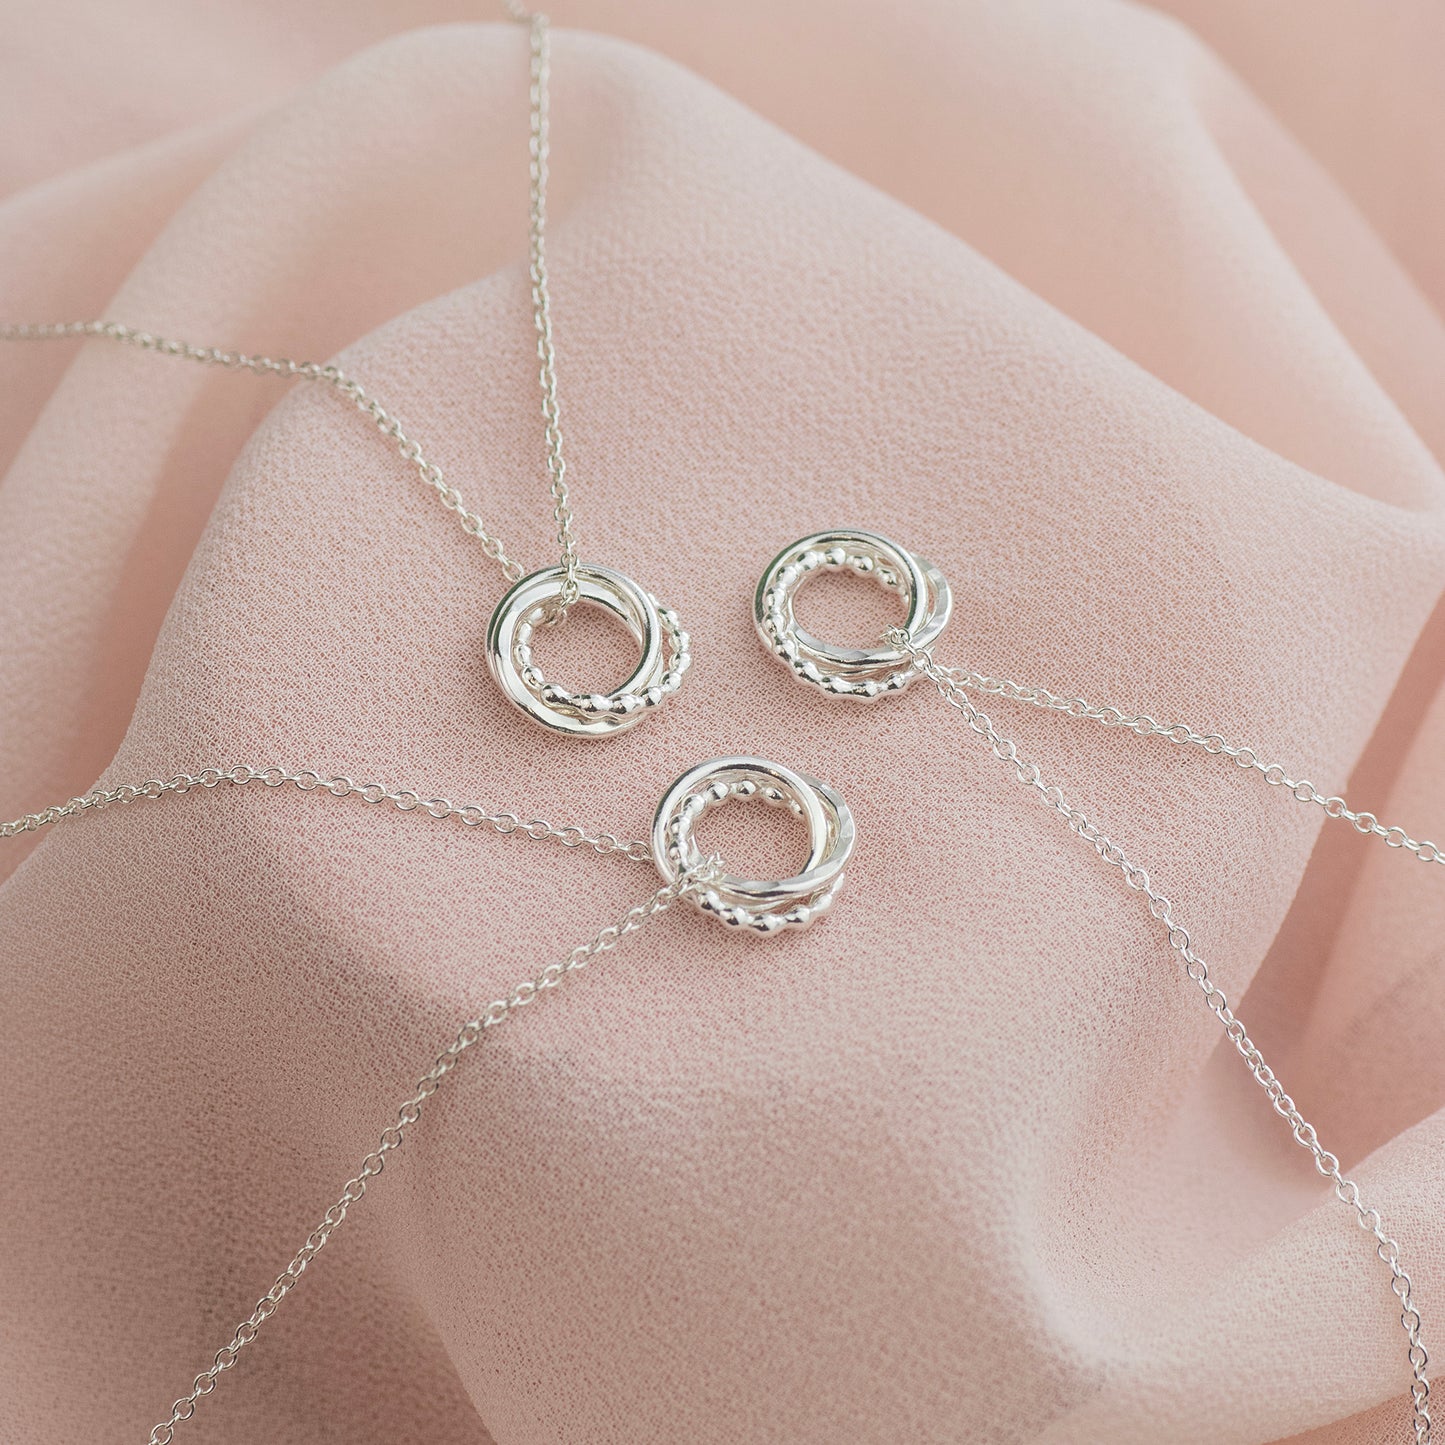 3 Siblings Necklaces Matching Set - Silver Love Knot Necklaces